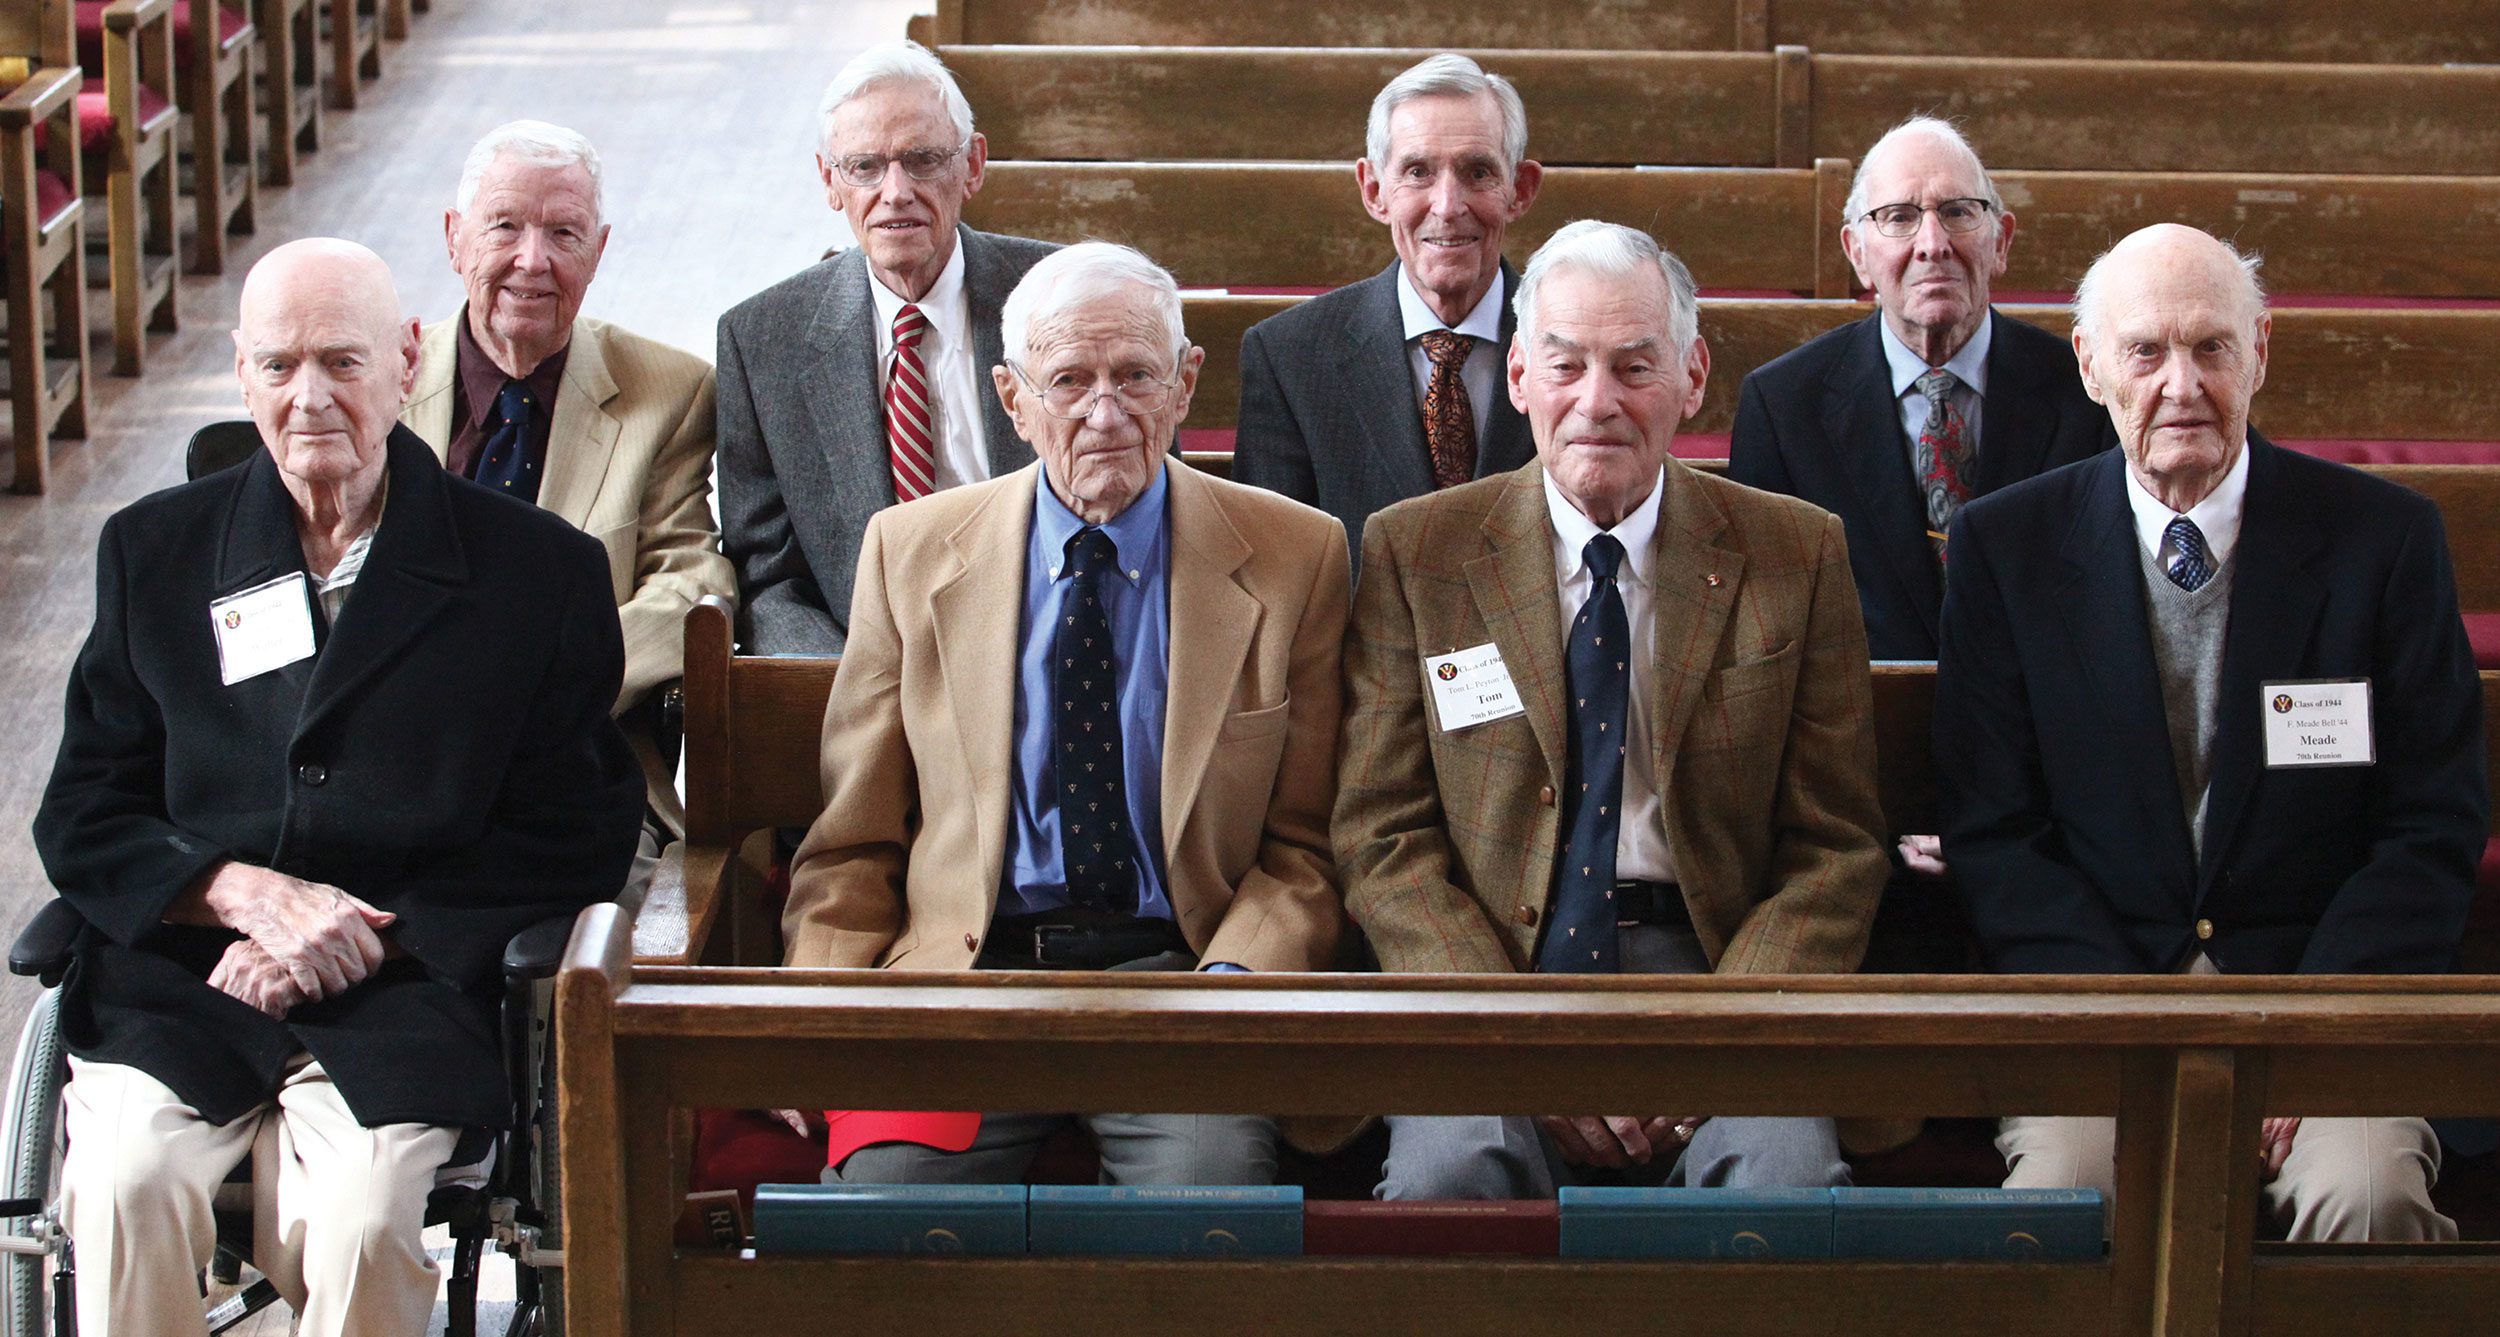 class of 1944 men sitting together